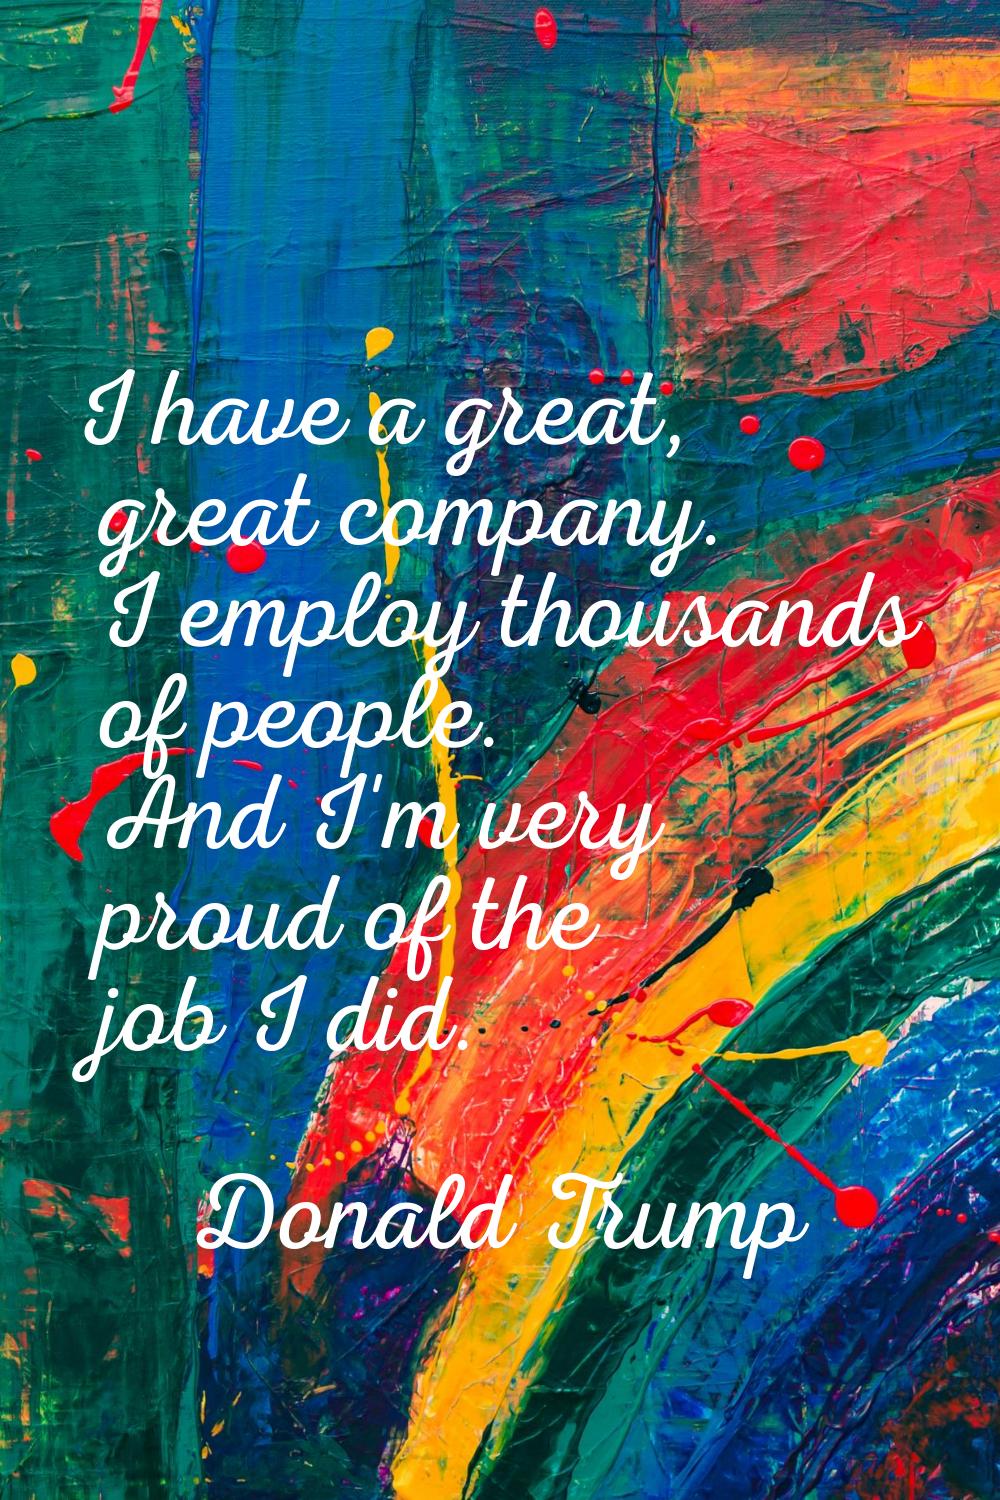 I have a great, great company. I employ thousands of people. And I'm very proud of the job I did.